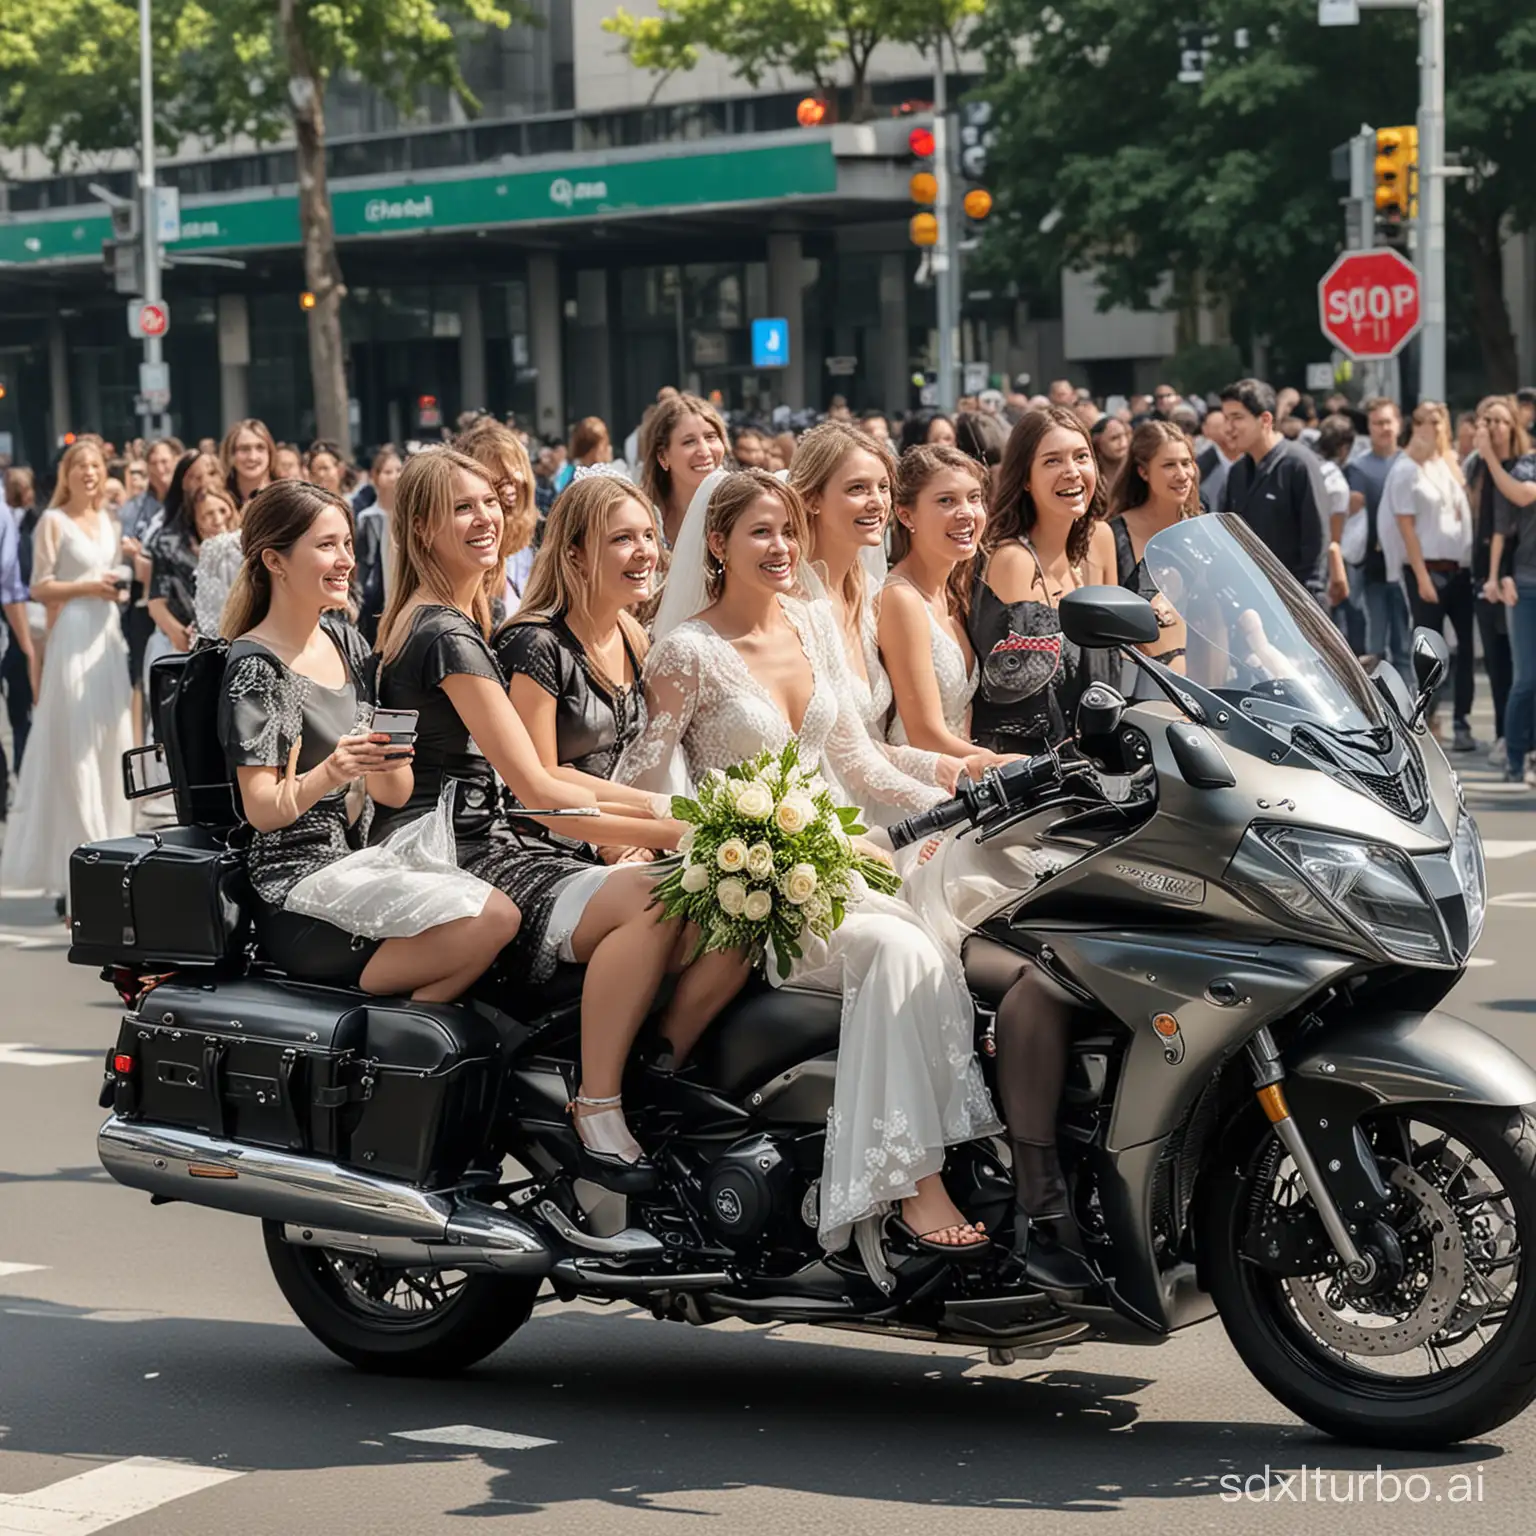 A 40-seat motorcycle with 40 brides stopped at the traffic light and people filming